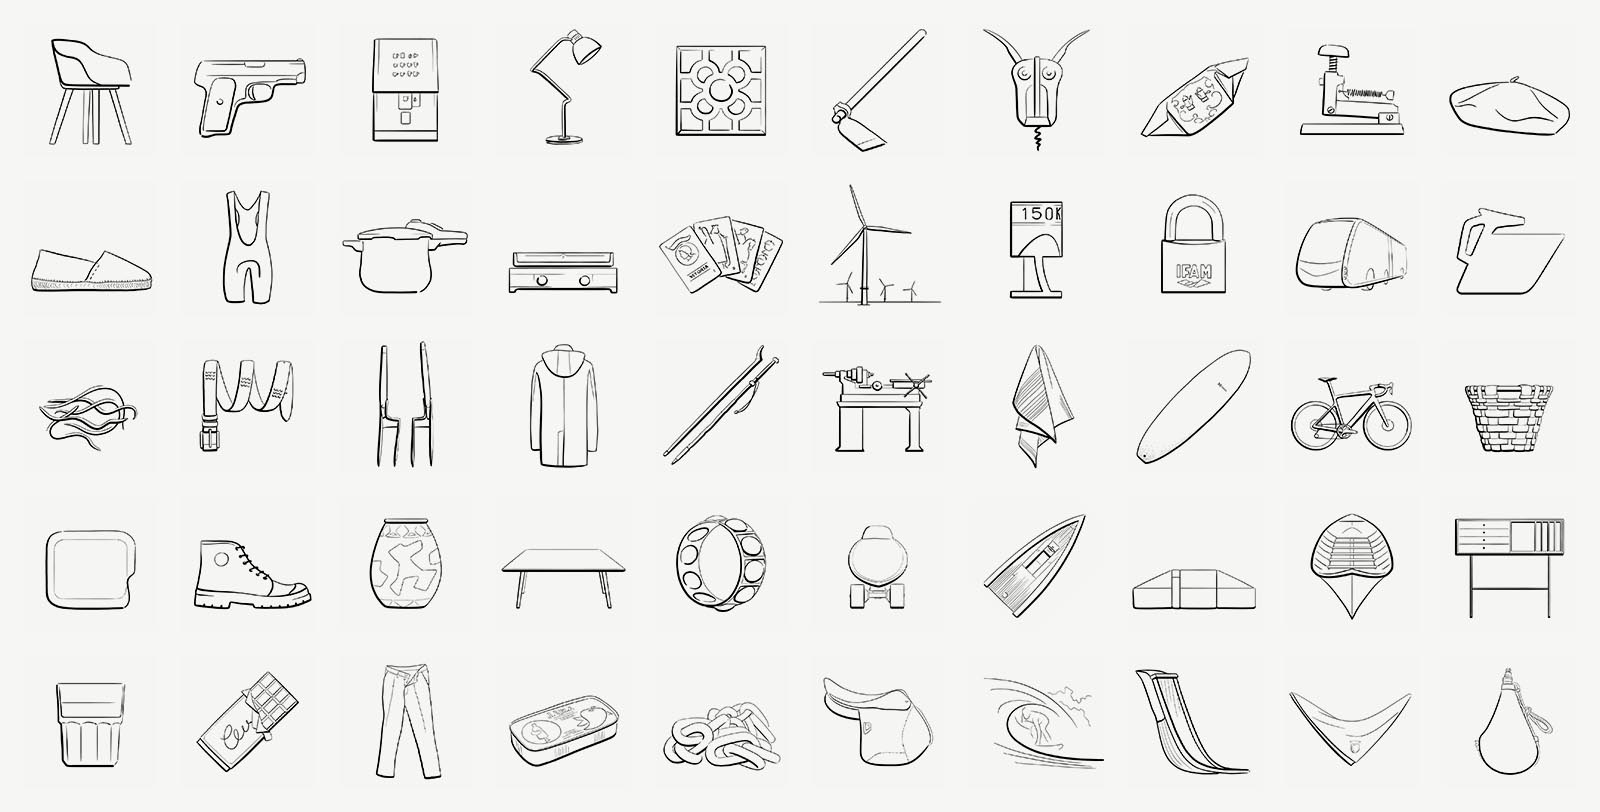 Illustrations of the 50 iconic objects from the Basque Country